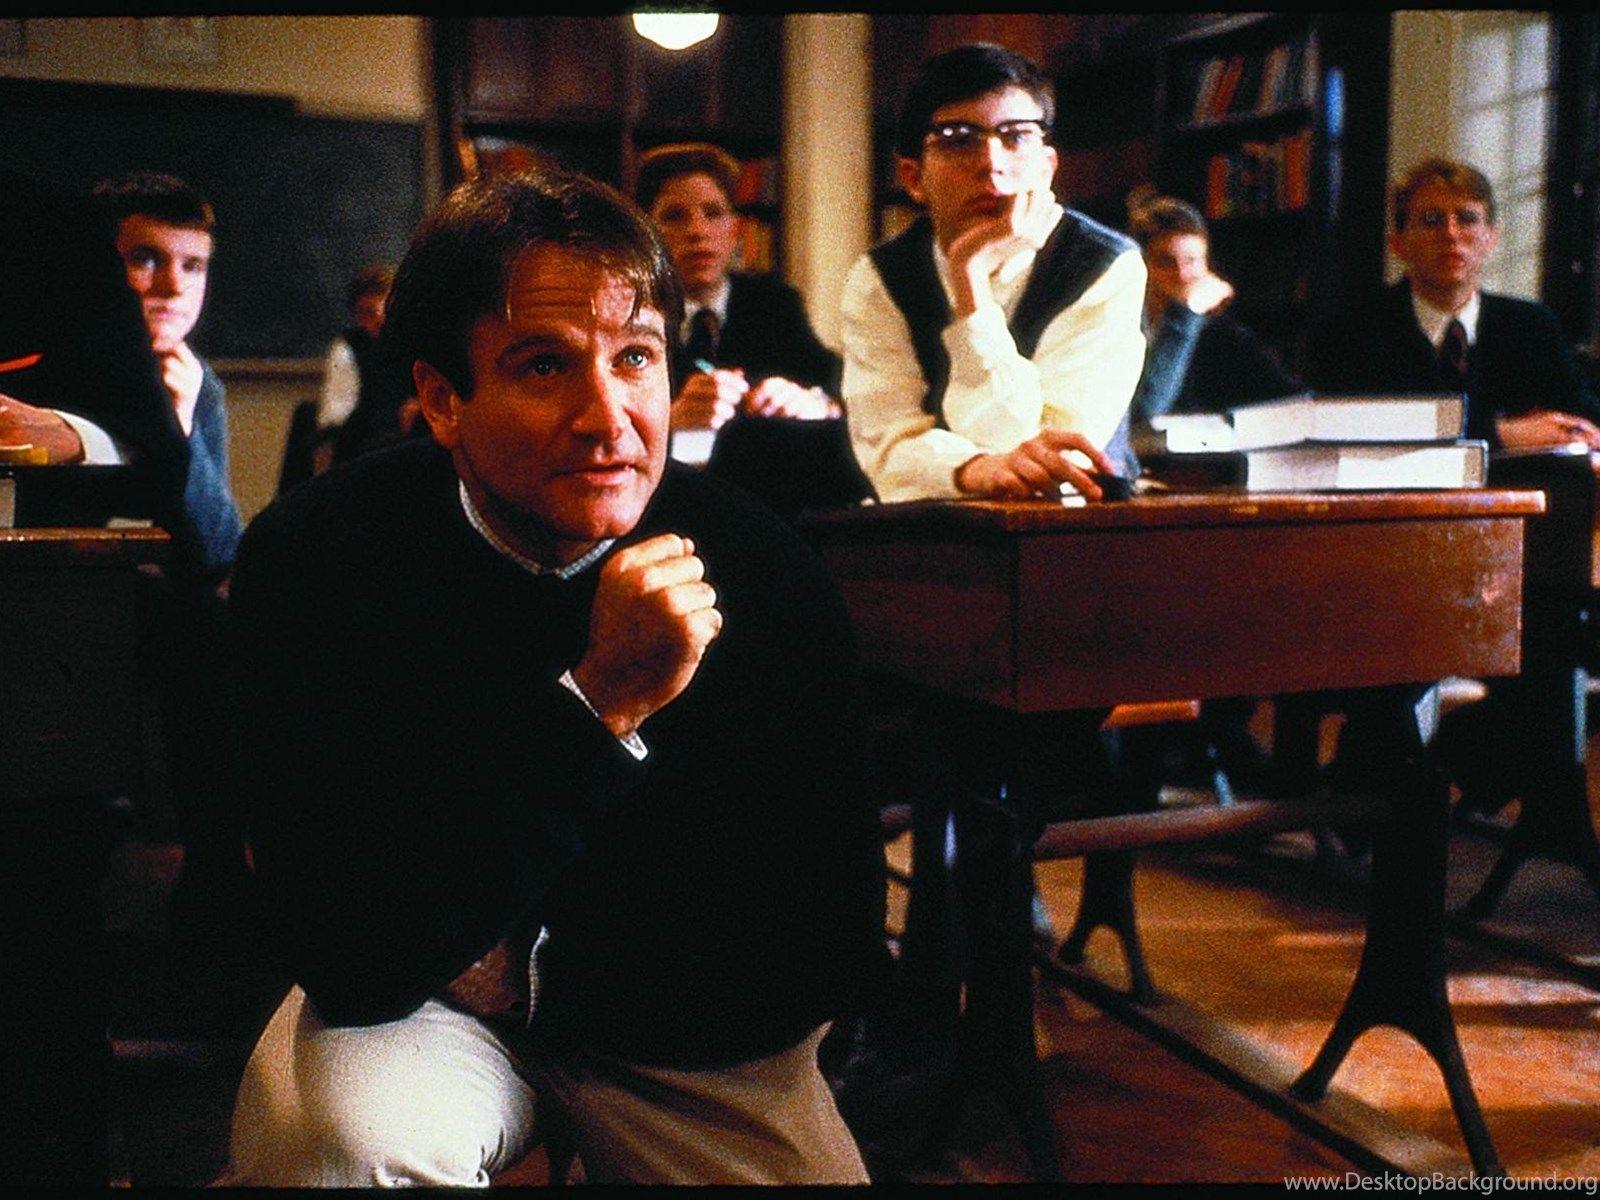 Search Results: 'Dead Poets Society' Desktop Background